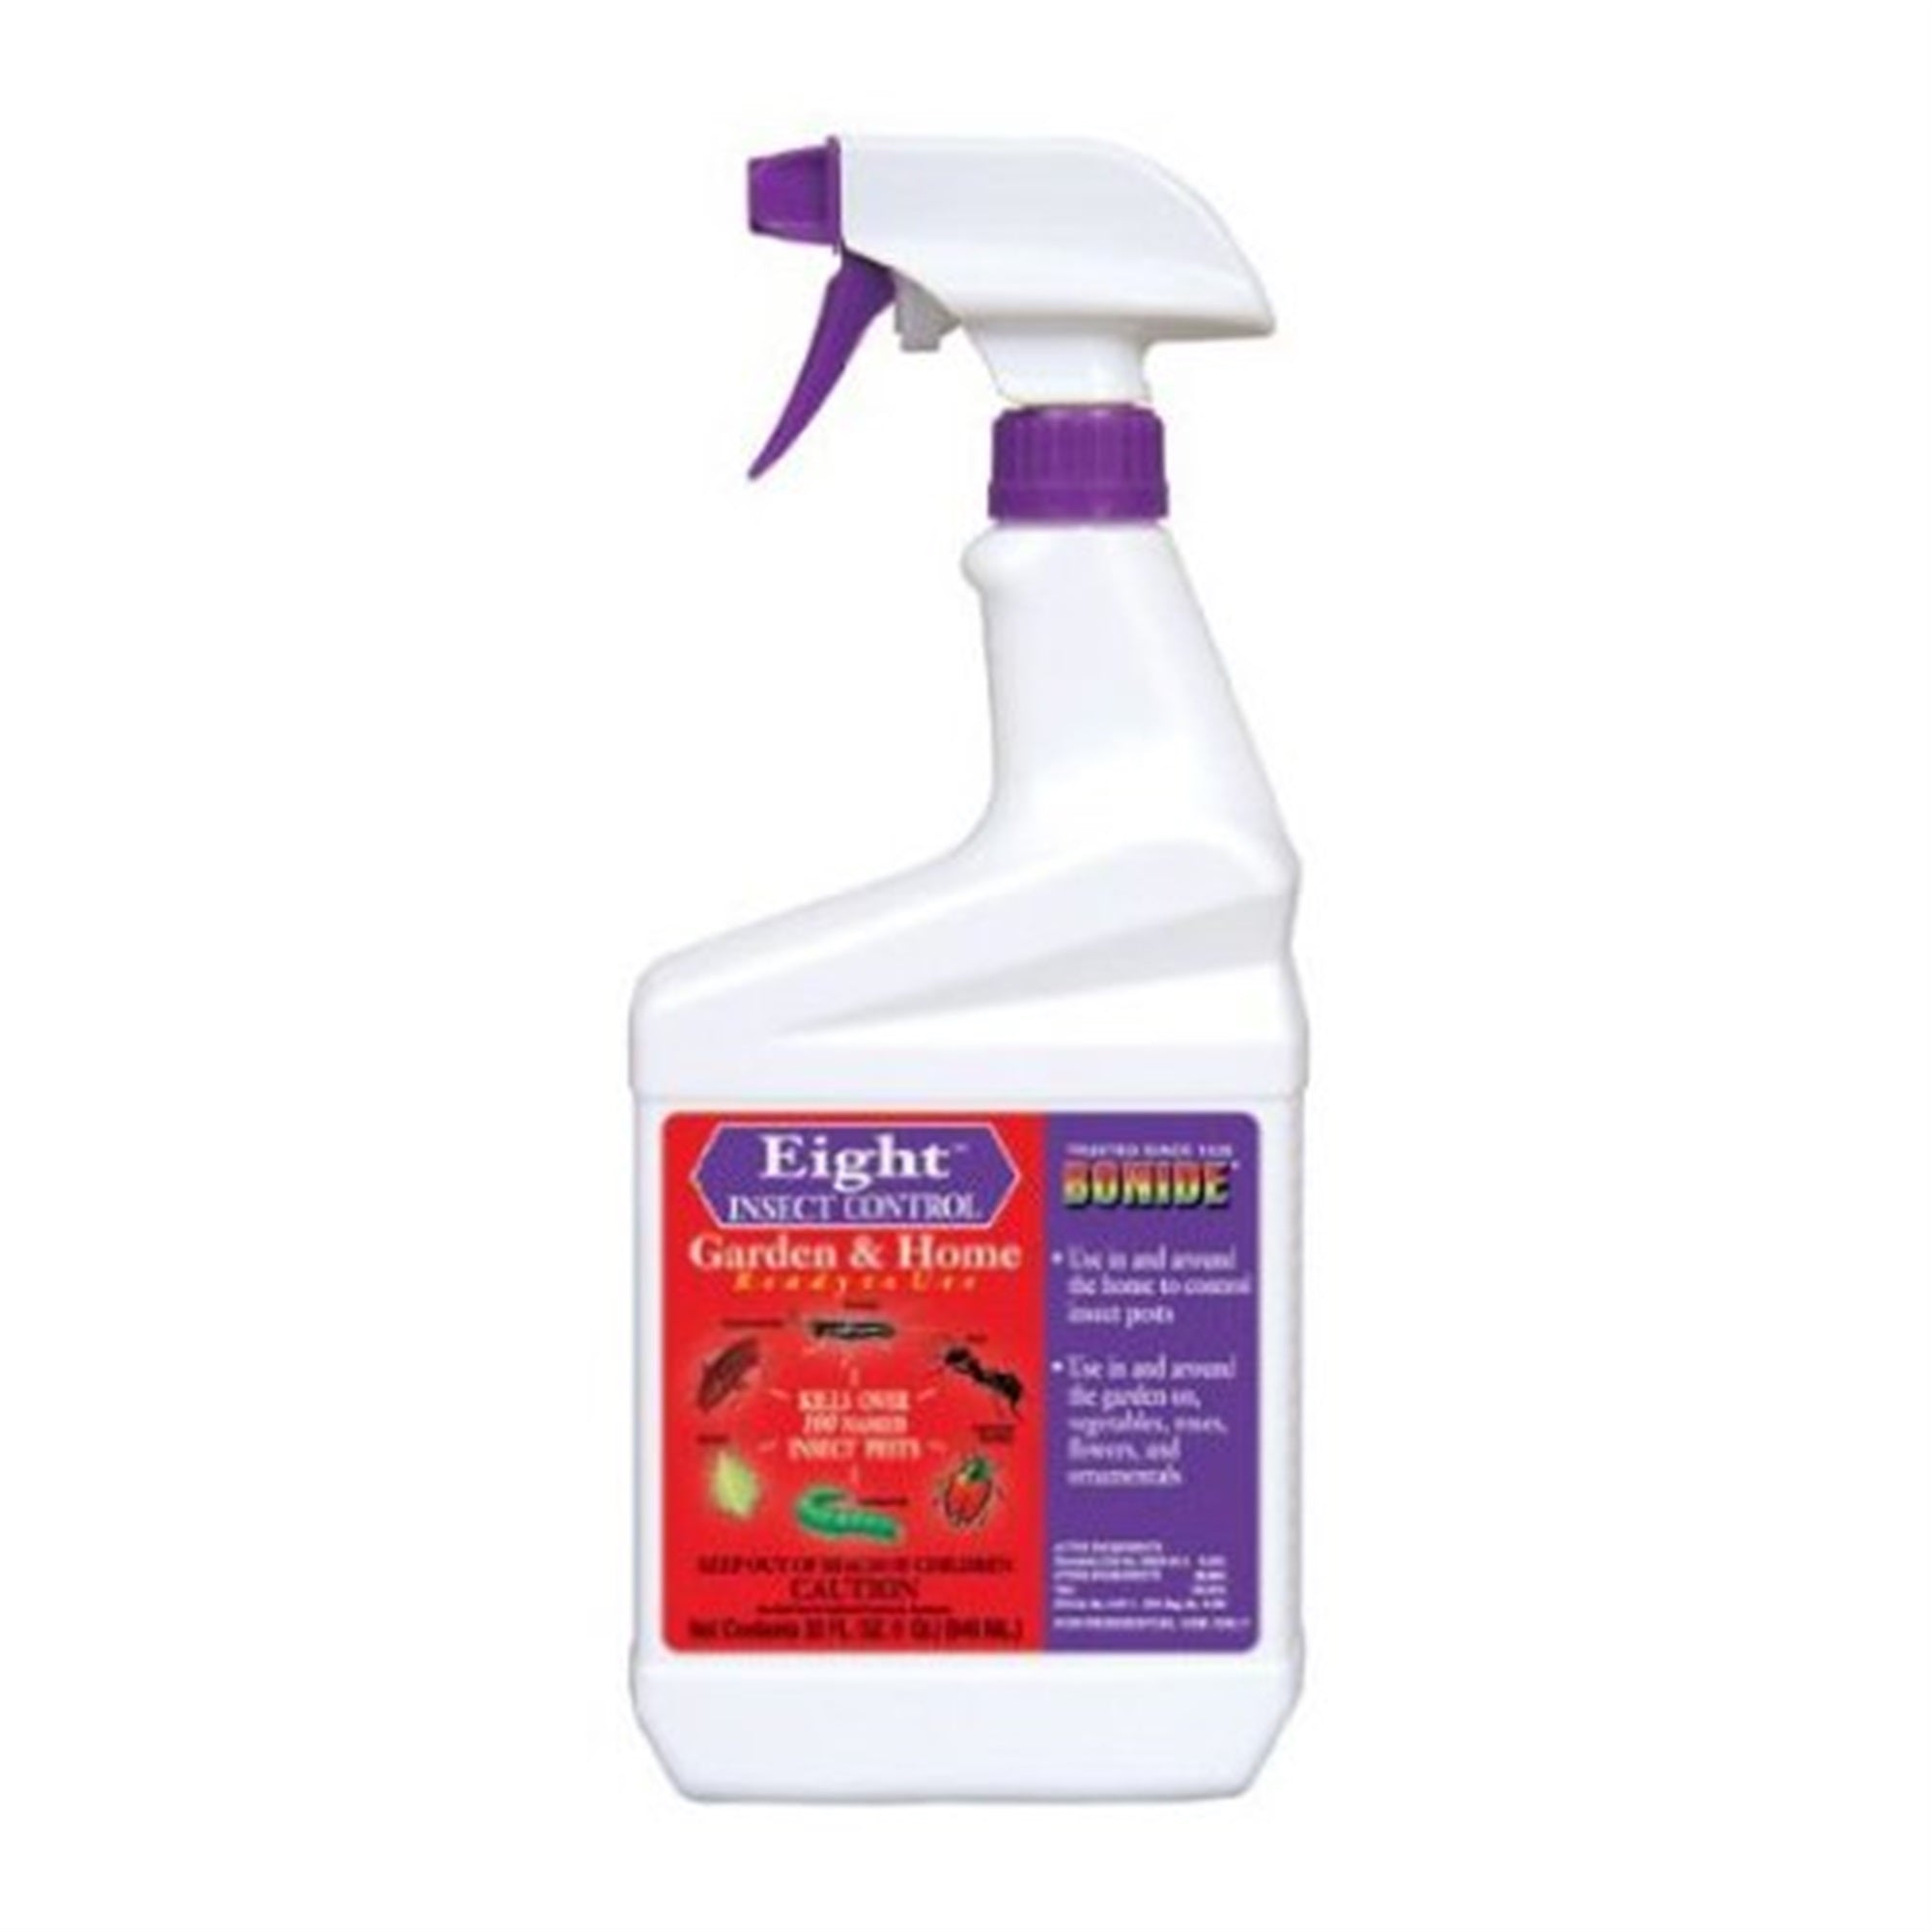 Bonide Eight Garden & Home Insect Control Ready To Use Spray, 1 Qt